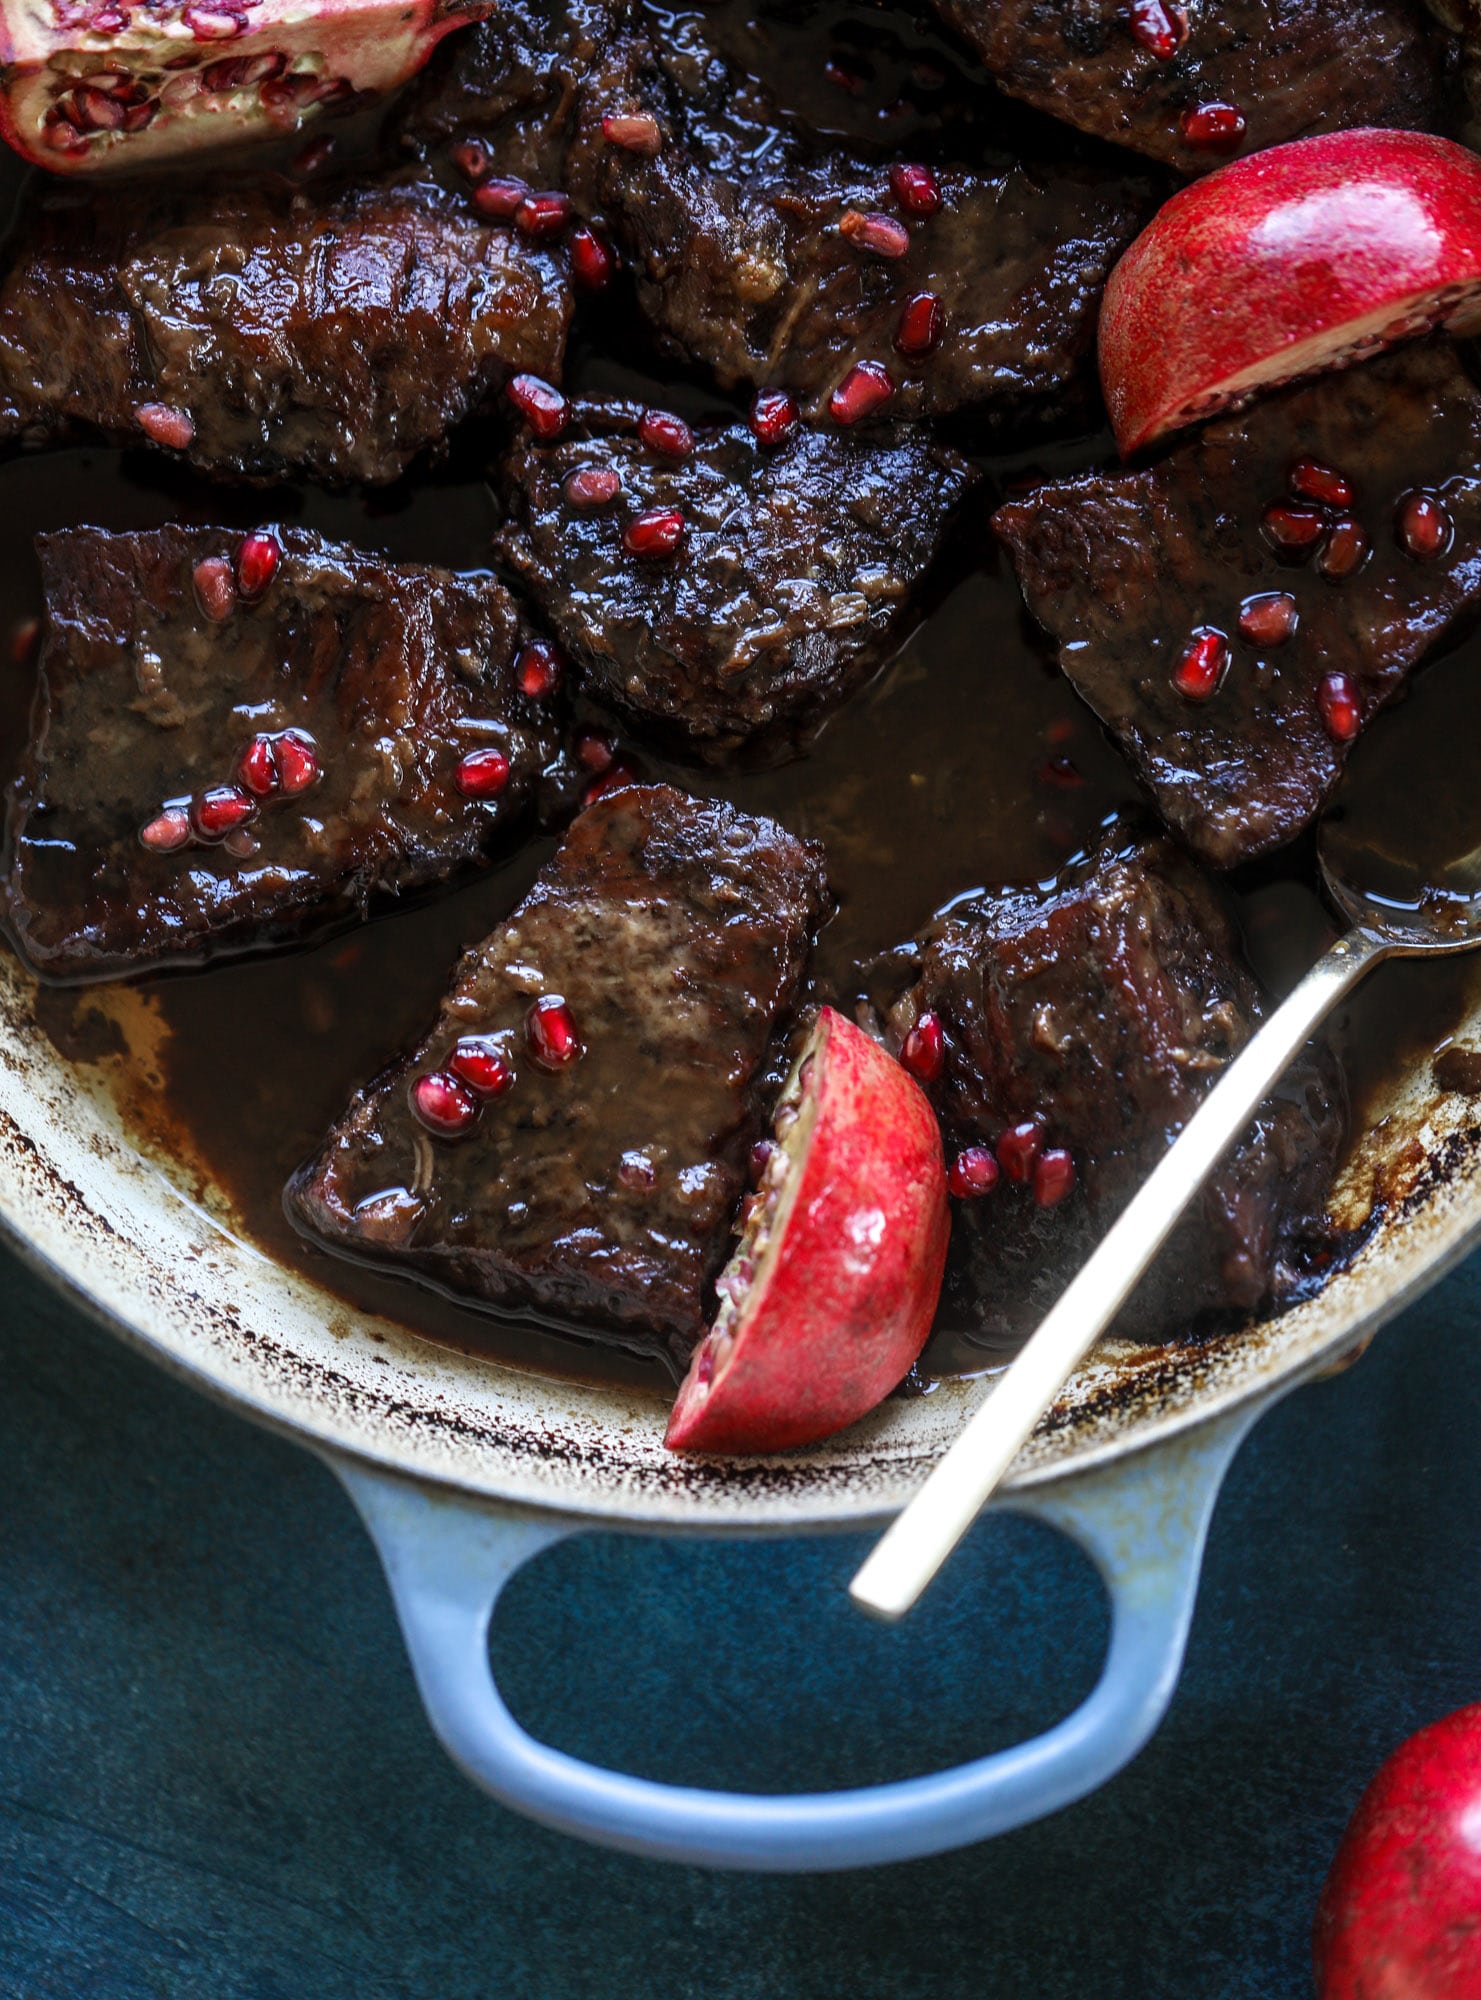 These pomegranate braised short ribs are an incredible take on comfort food! Pomegranate juice and molasses are the base of the recipe and after braising, you're left with tender, juicy and flavorful beef that is amazing served with polenta, potatoes or even in tacos. I howsweeteats.com #braised #shortribs